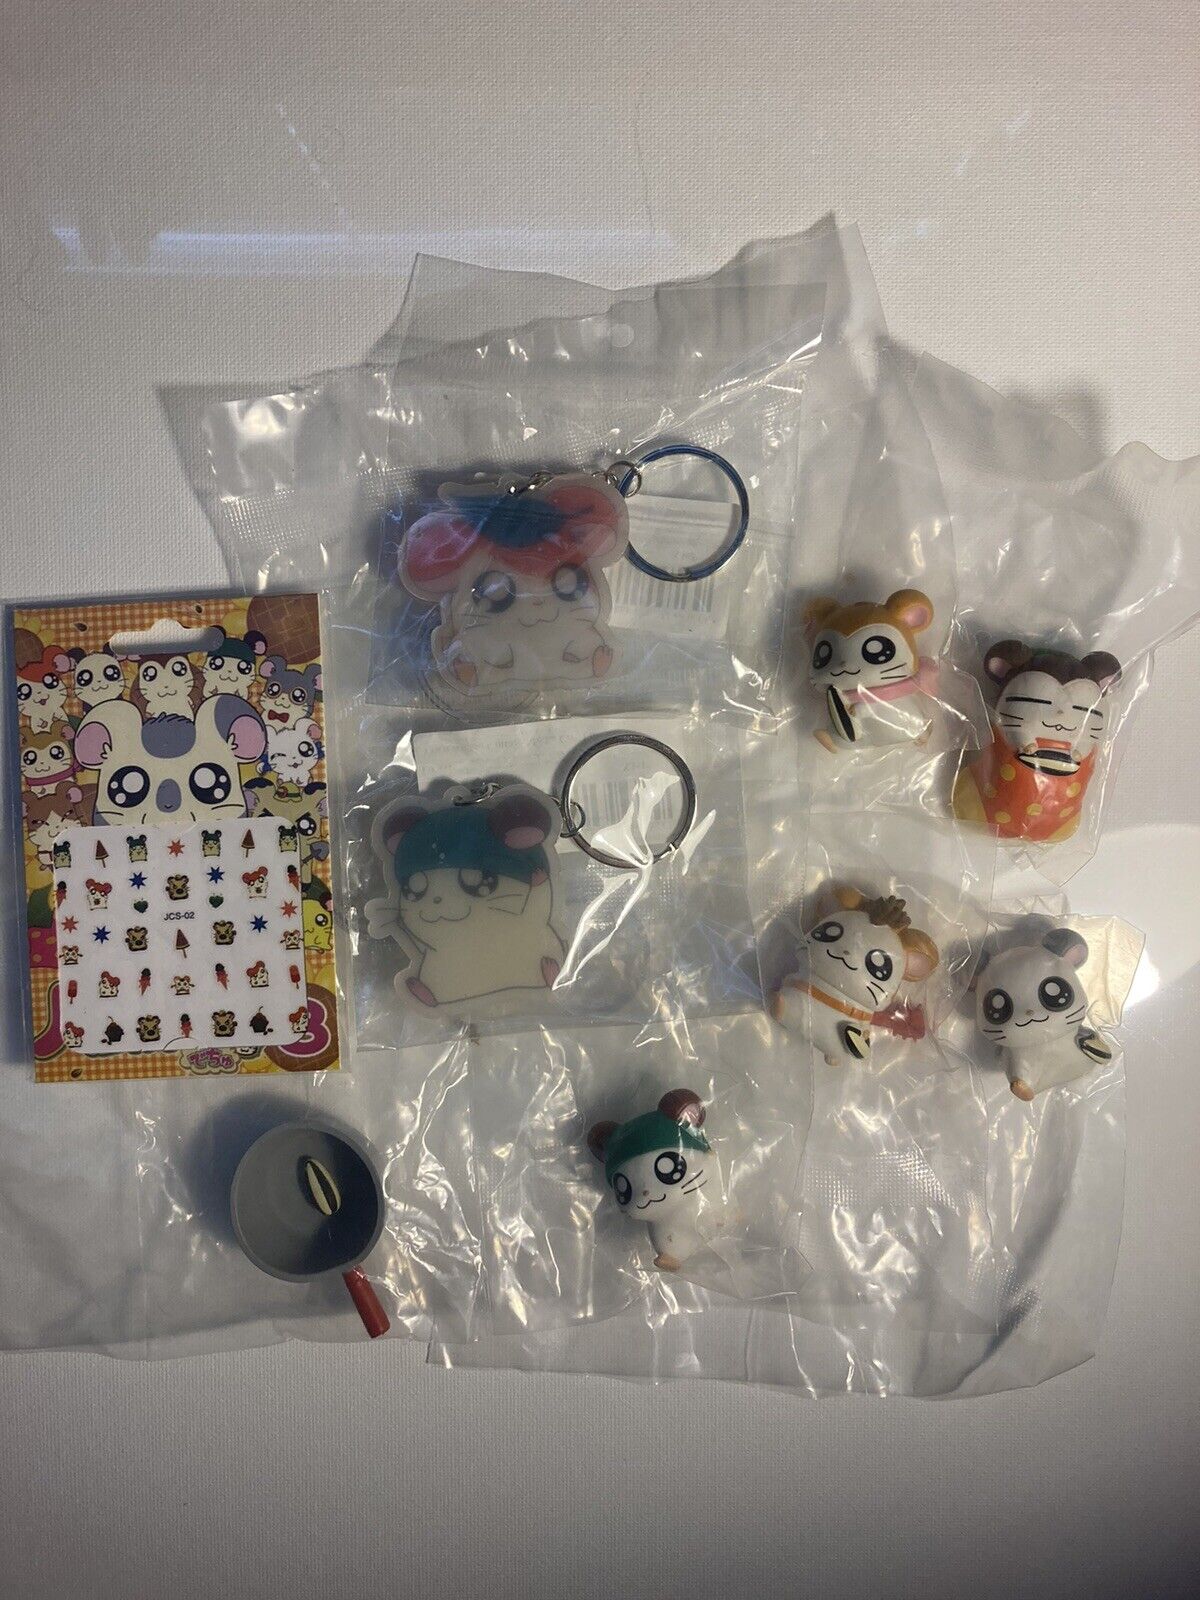 Hamtaro Bundle - Brand New Figures, Keychains, And Nail Stickers